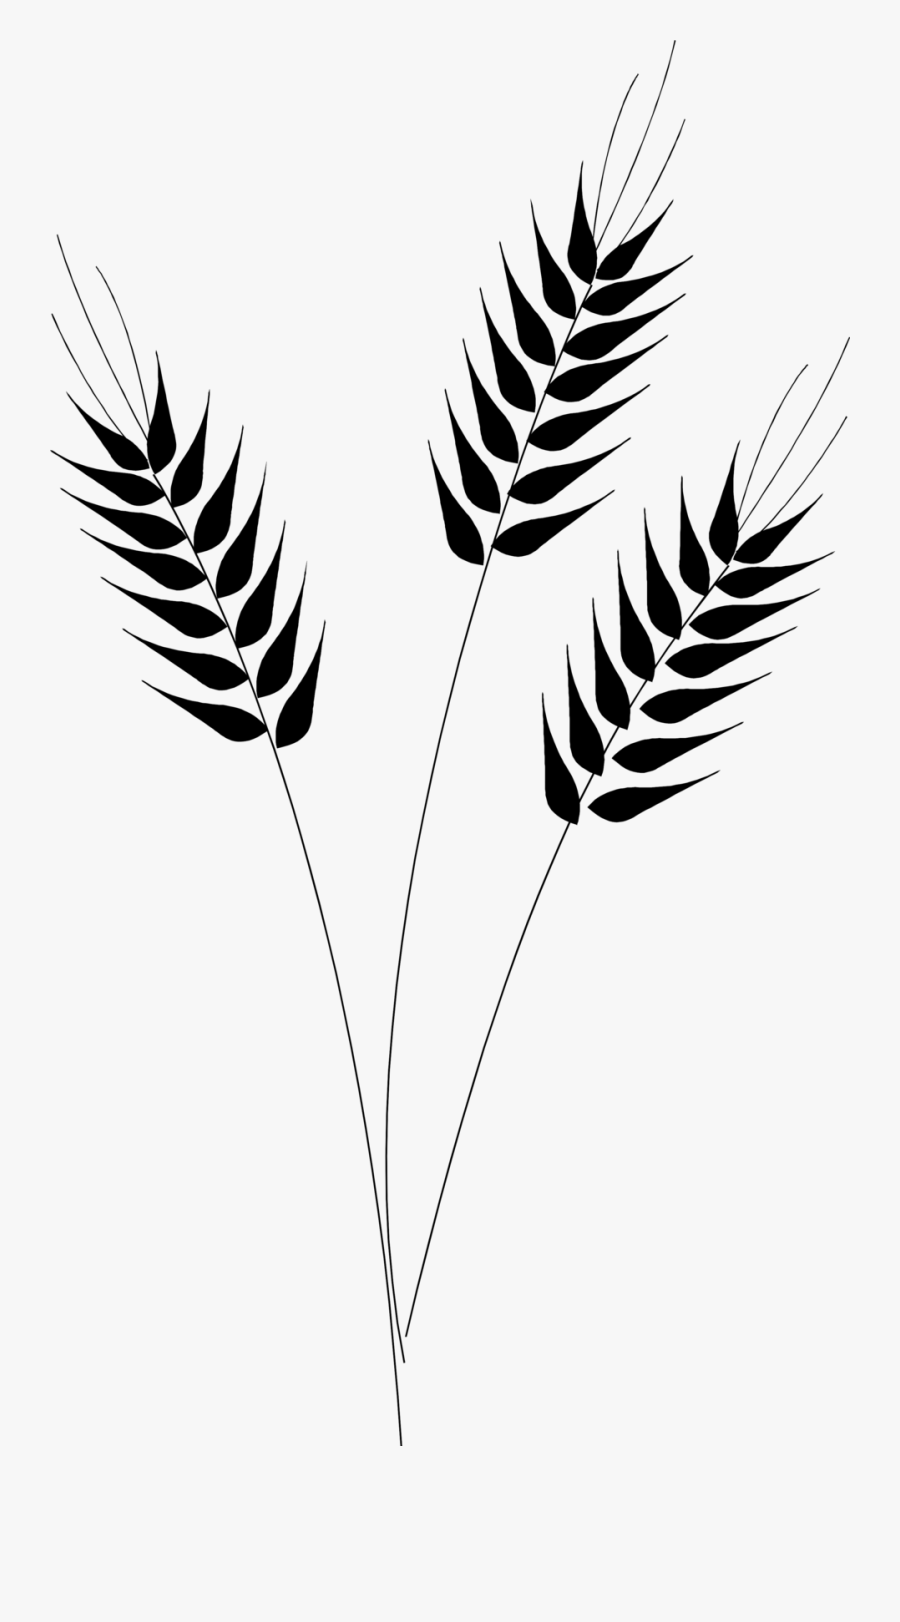 Wheat Clipart Drawn - Wheat Clipart Black And White, Transparent Clipart